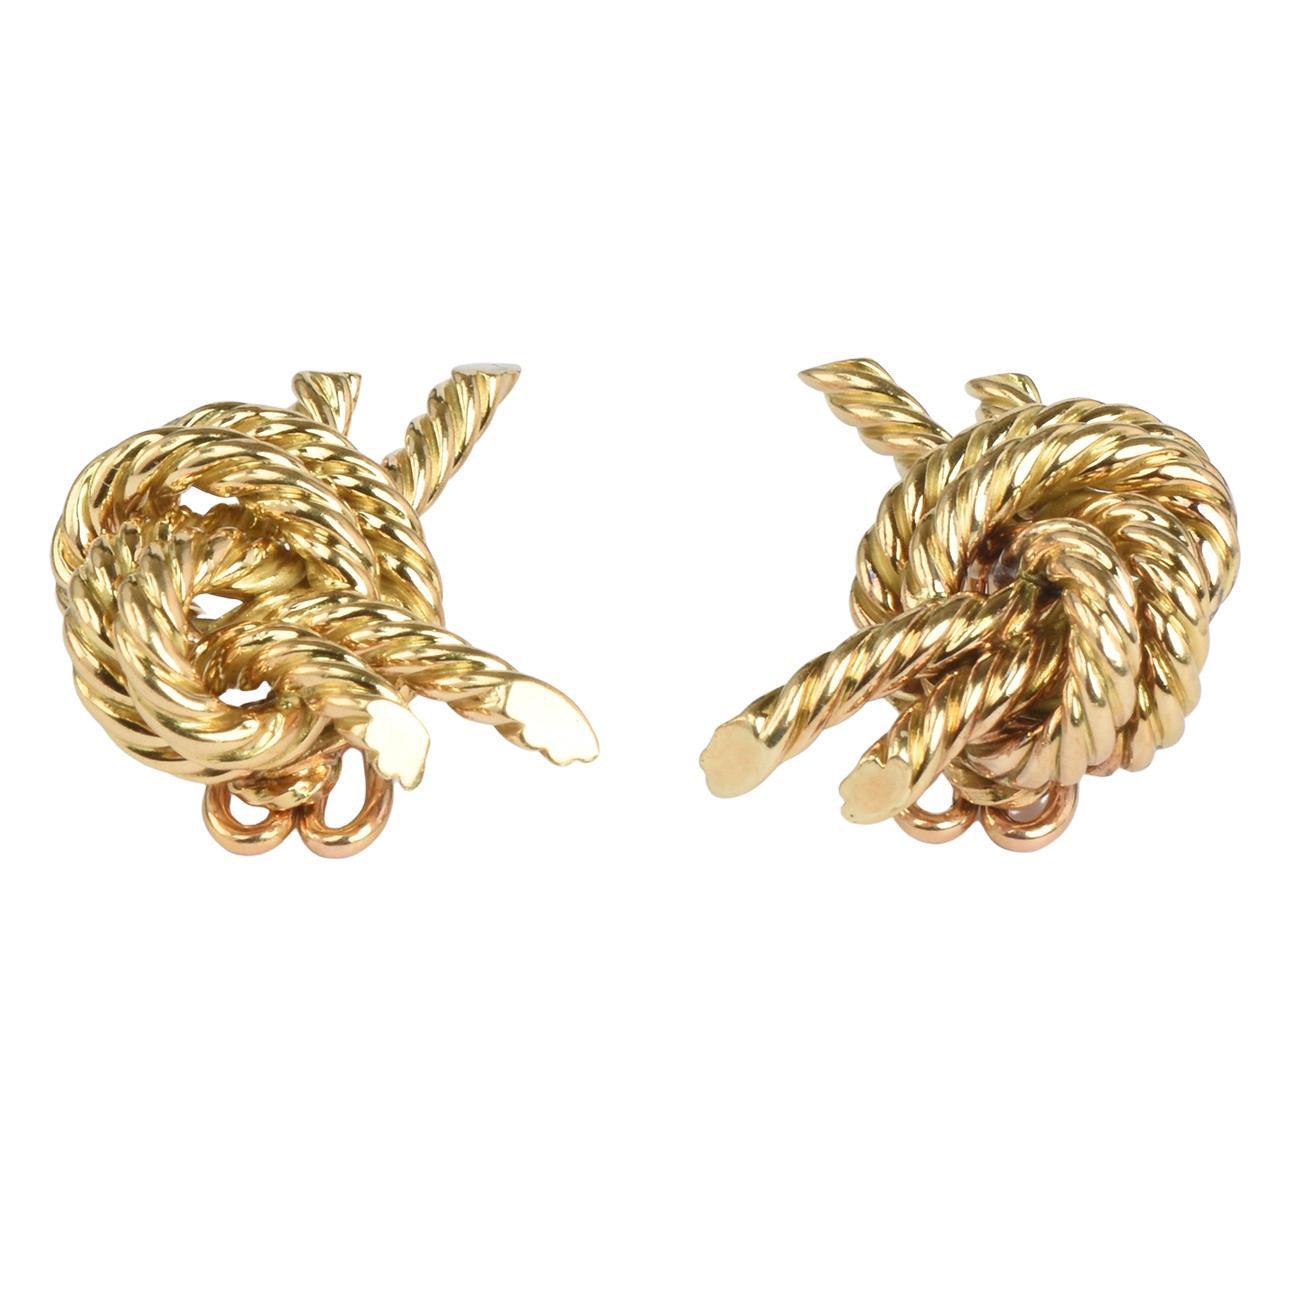 A vintage 18k yellow gold Hermès tied gold knot rope design clip on Earrings by Georges L'Enfant.

Made in France, Paris, Circa 1960’s.

French marks 18k,  Marked Hermes Paris